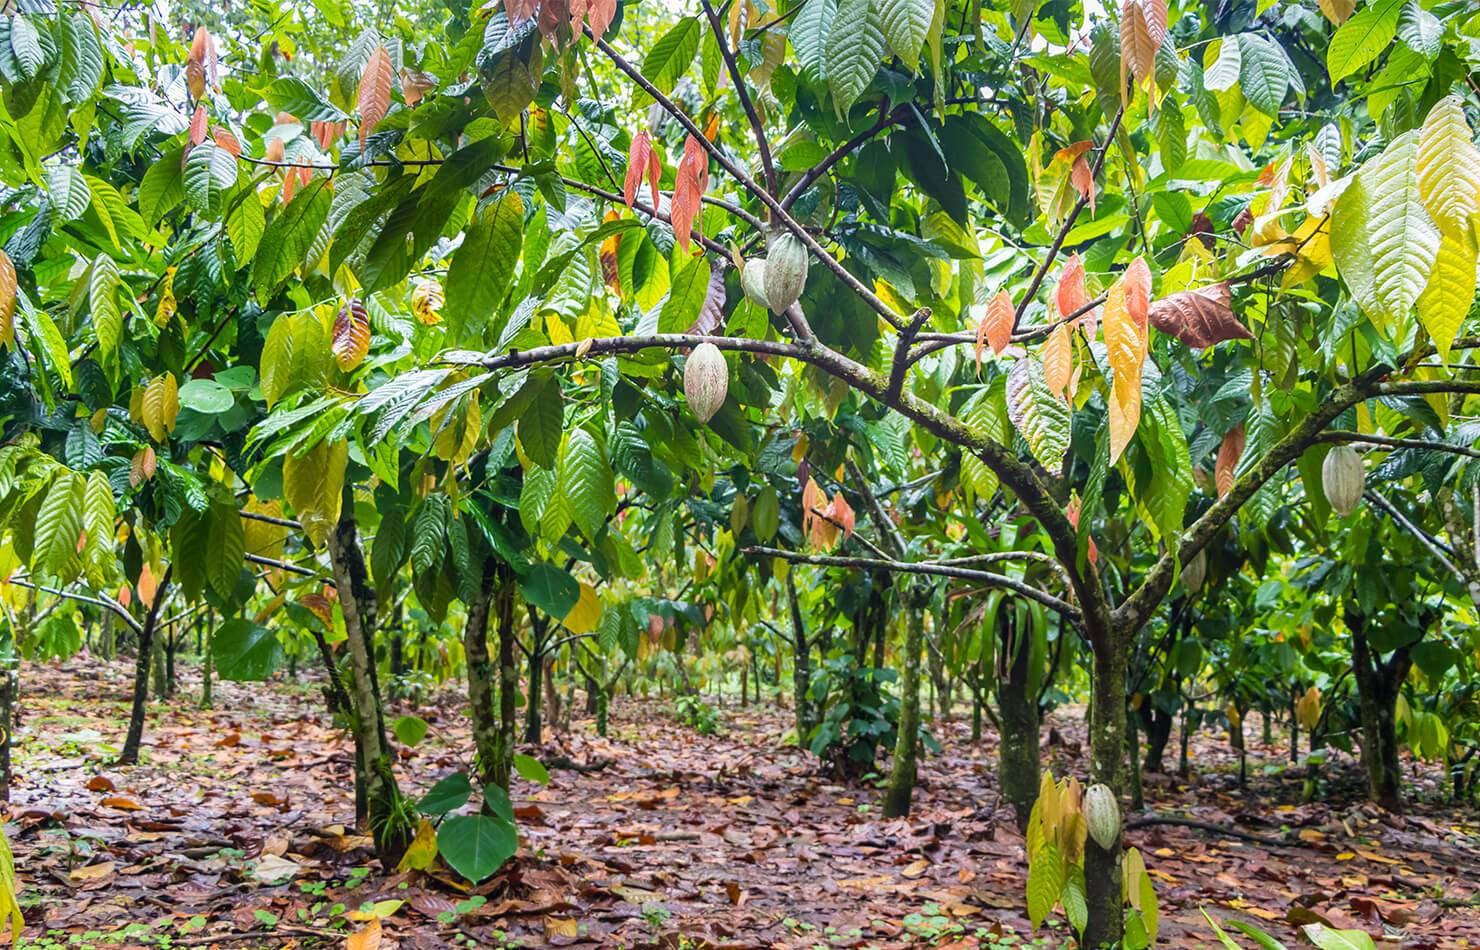 Several trees in a cacao grove with lots of cacao fruits hanging on them